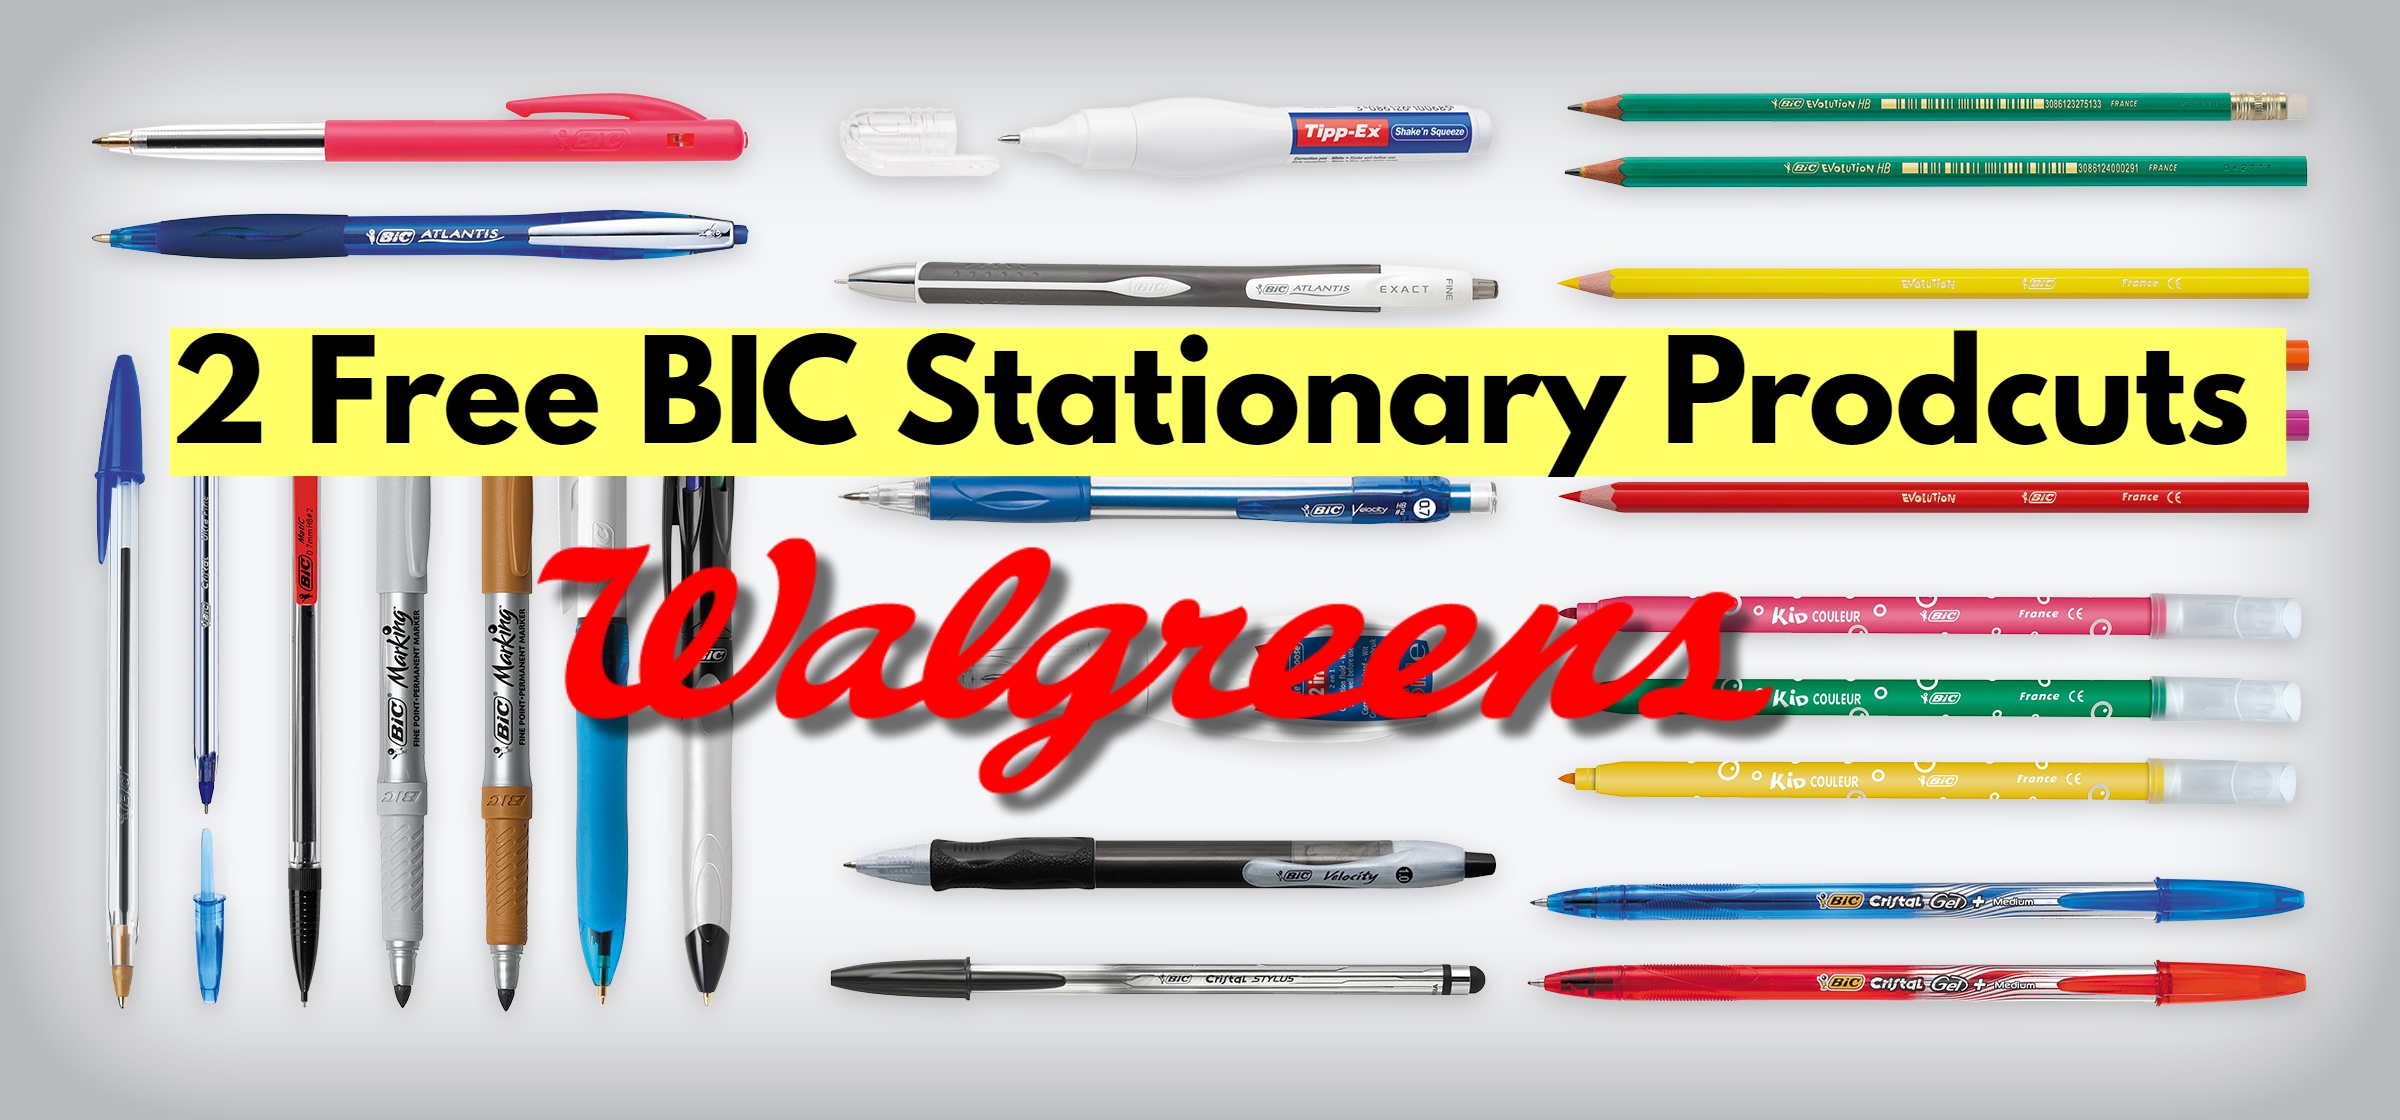 Walgreens -2 Free Bic Stationary Products Free After Coupon